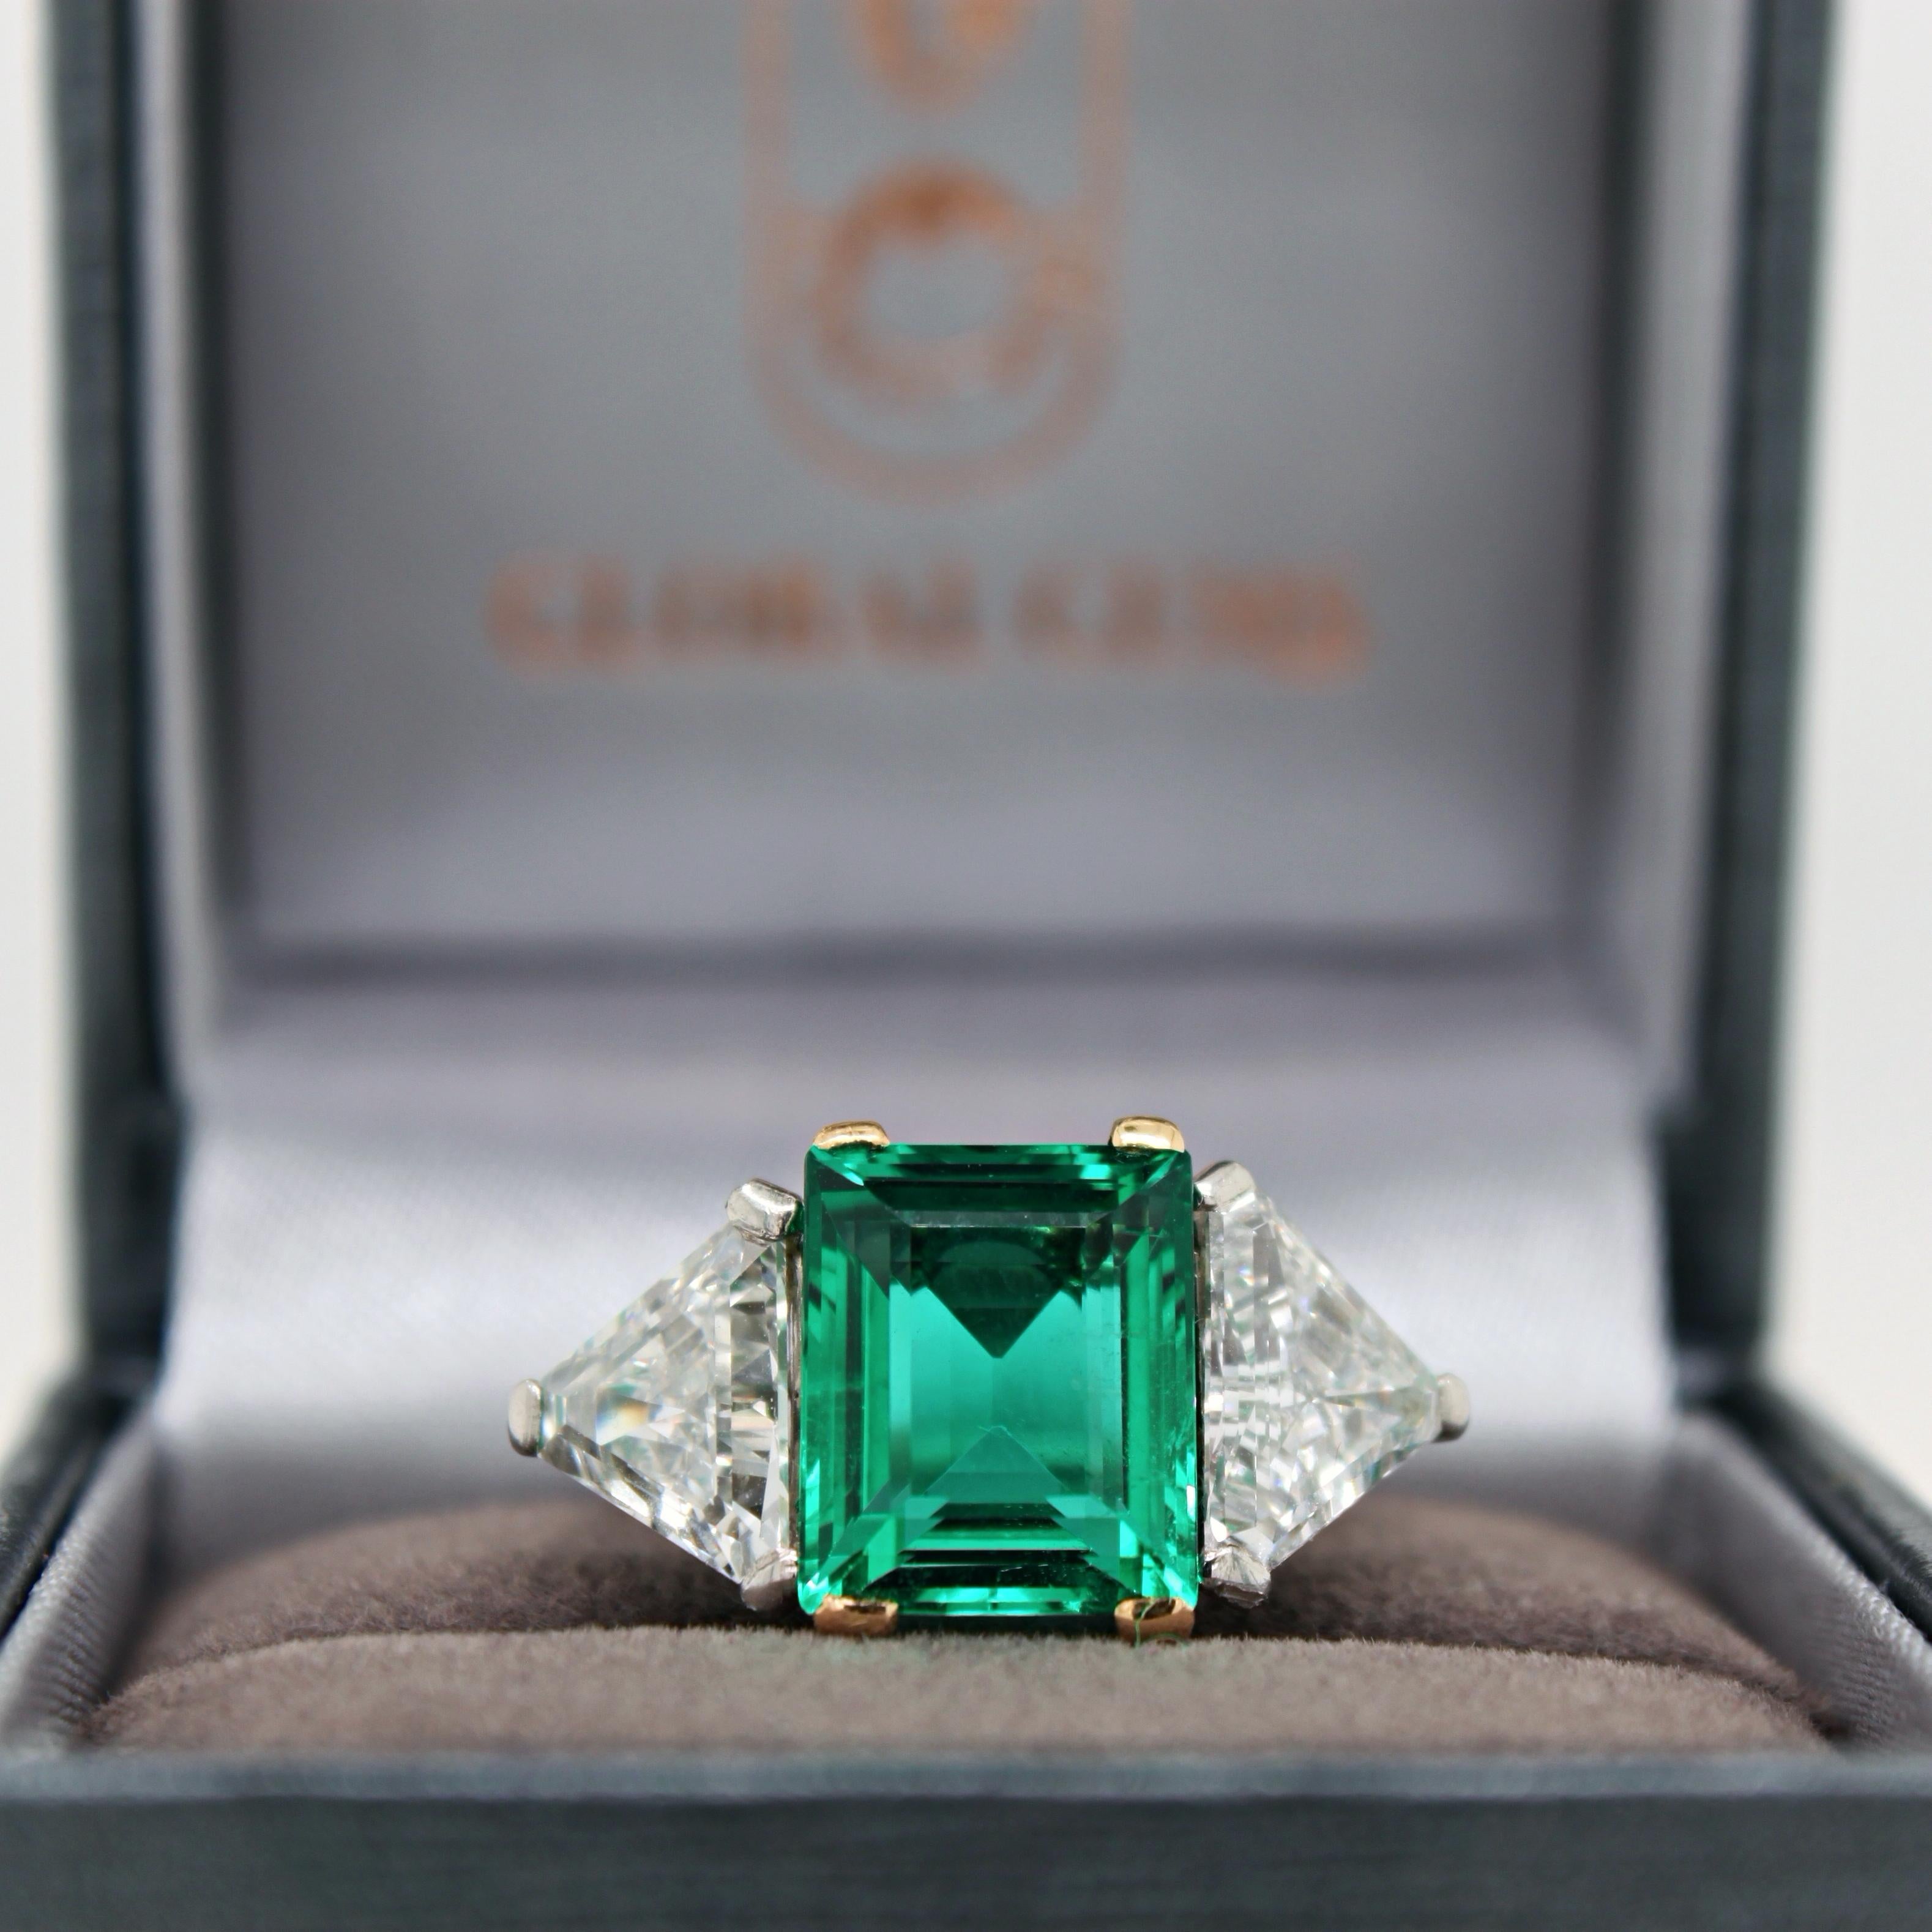 A high jewellery Cartier ring with an emerald and two diamond triangle cuts. The emerald is a very fine collector’s gemstone with an SSEF certificate stating that the emerald is no-oil and of Colombian origin. It is extremely rare for an emerald to